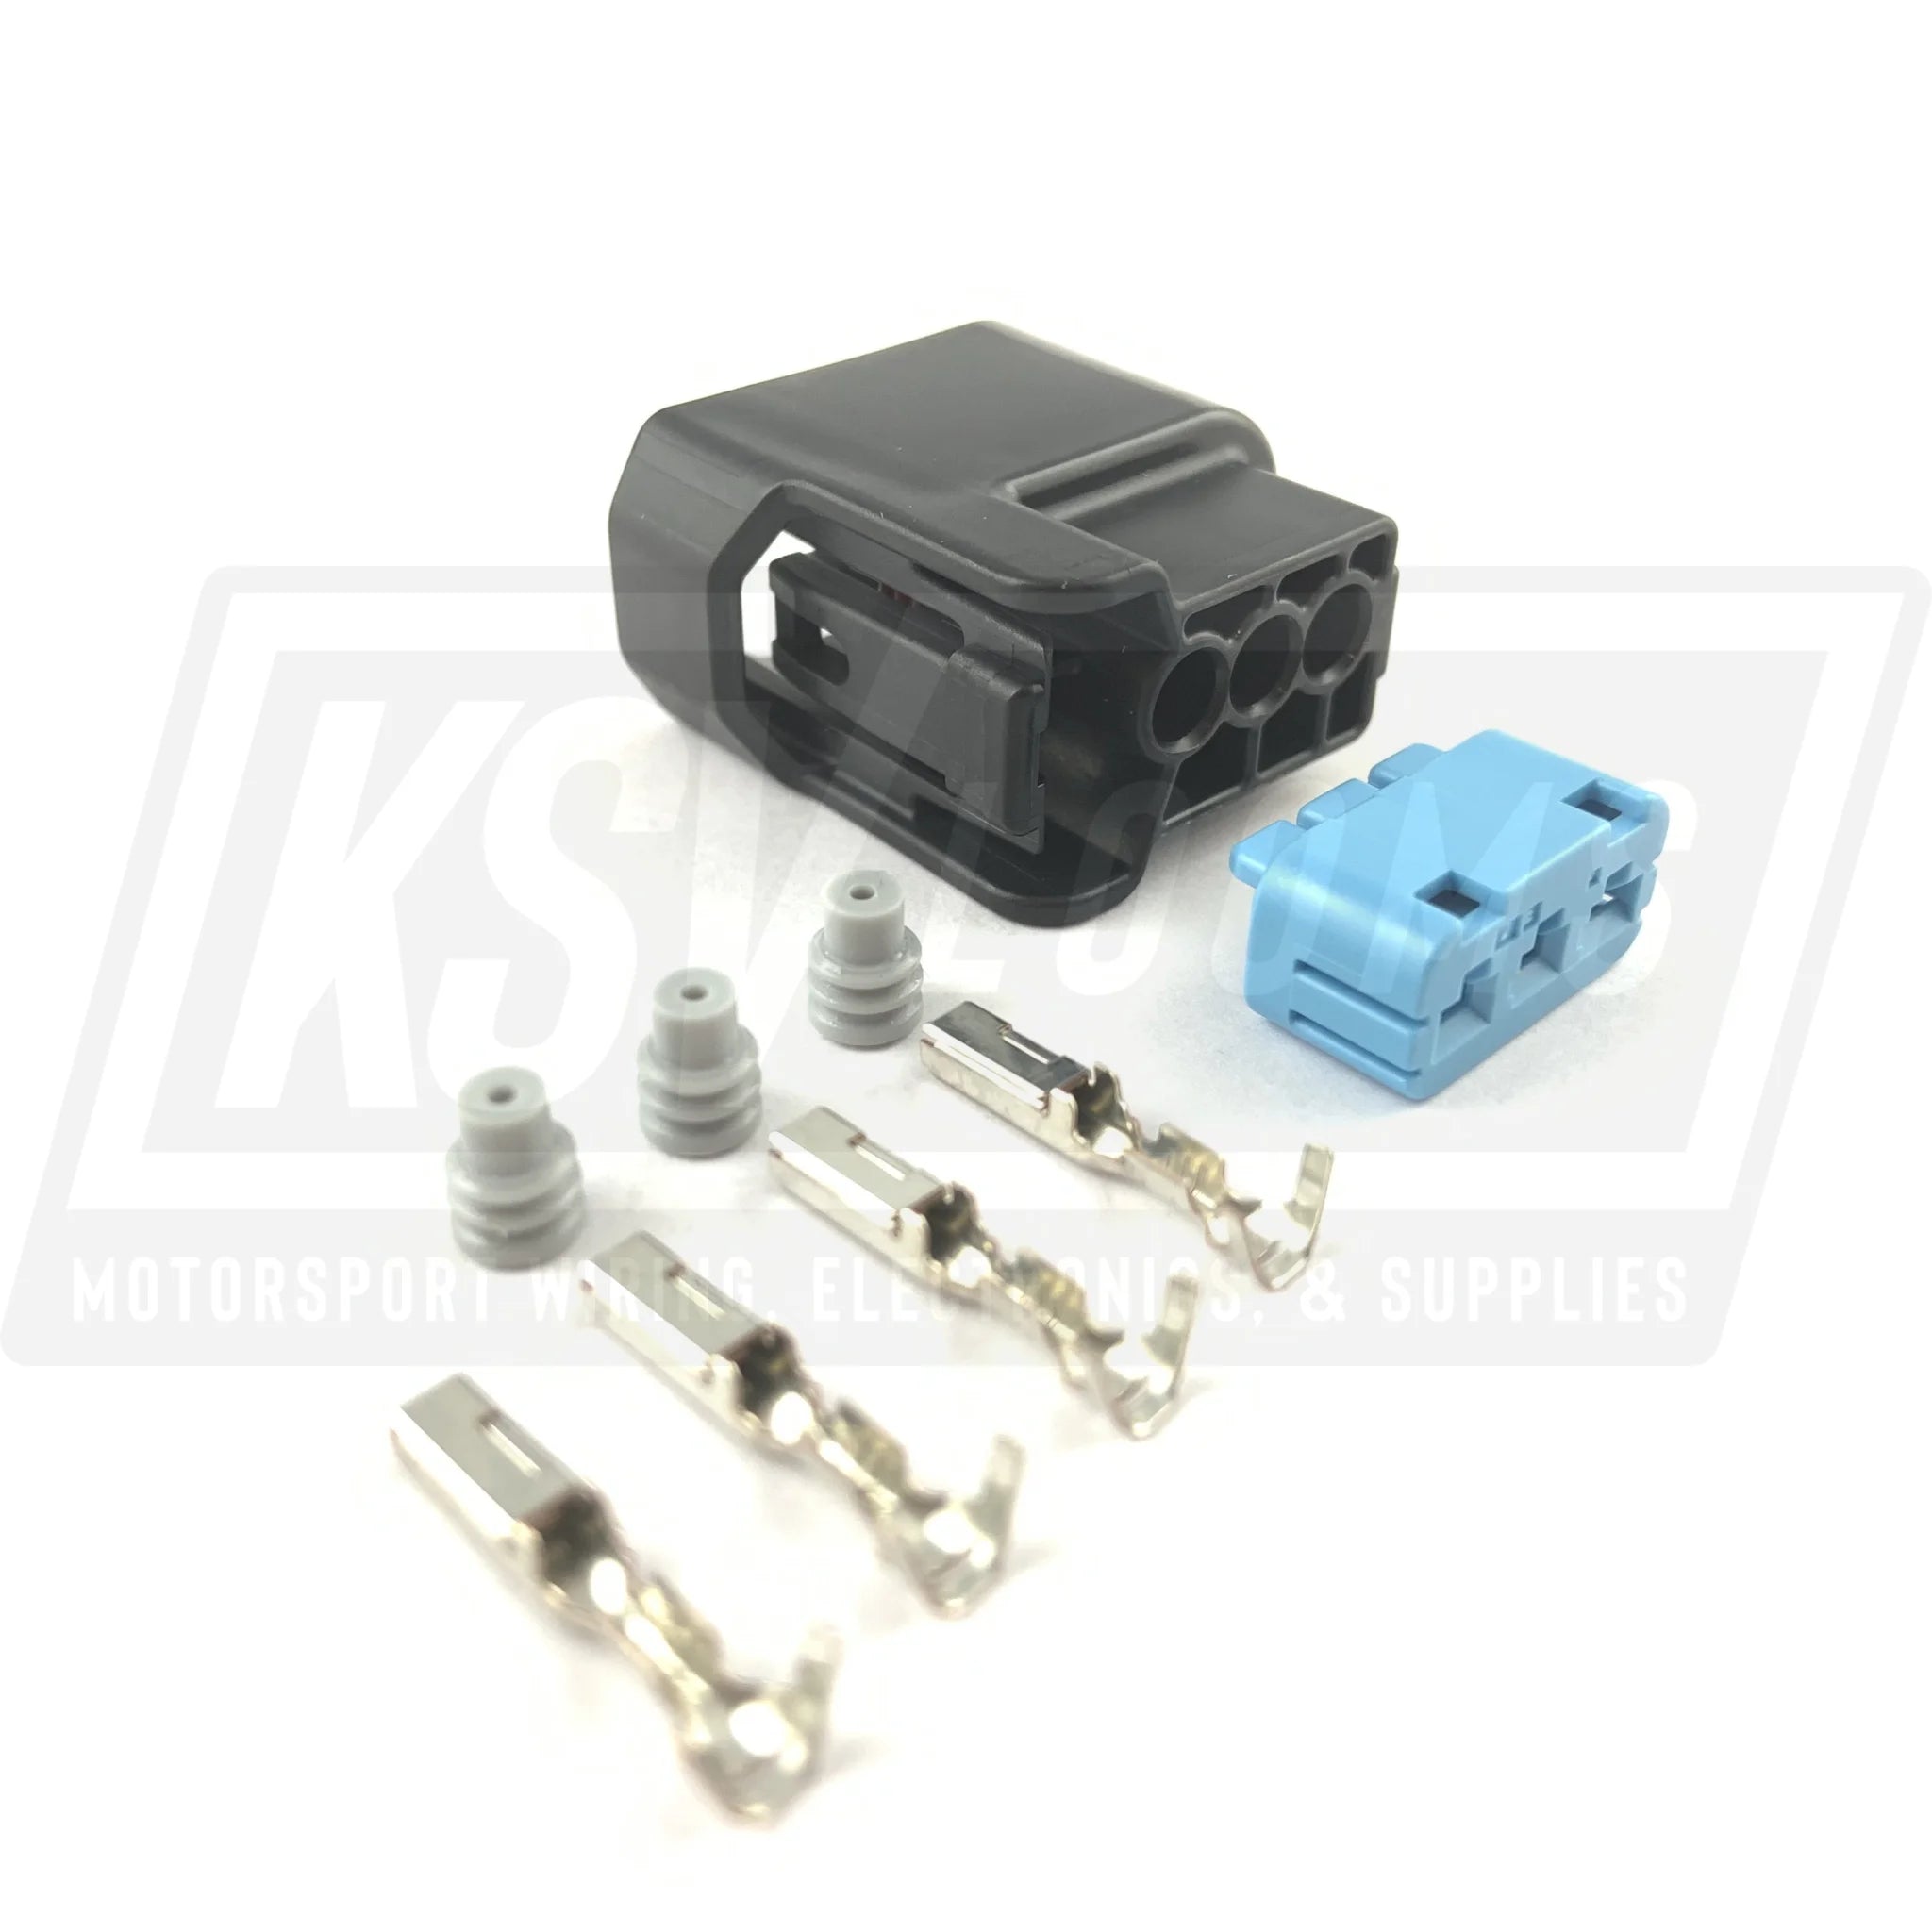 3-Way Connector Kit For Honda K-Series K20 K24 Ignition Coil Pack (22-20 Awg)